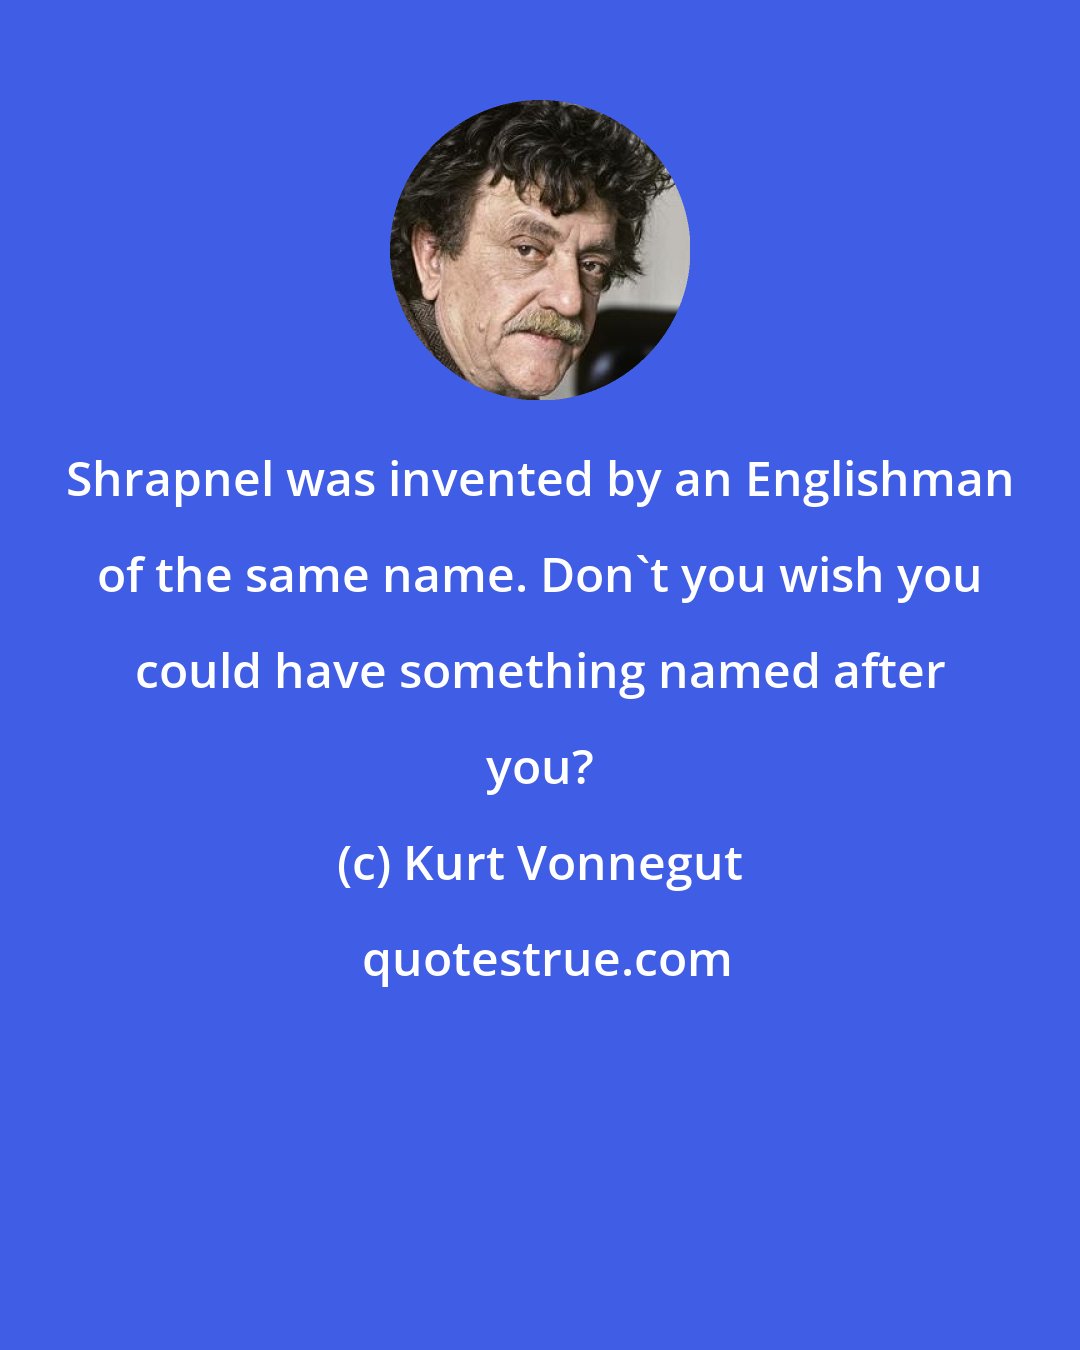 Kurt Vonnegut: Shrapnel was invented by an Englishman of the same name. Don't you wish you could have something named after you?